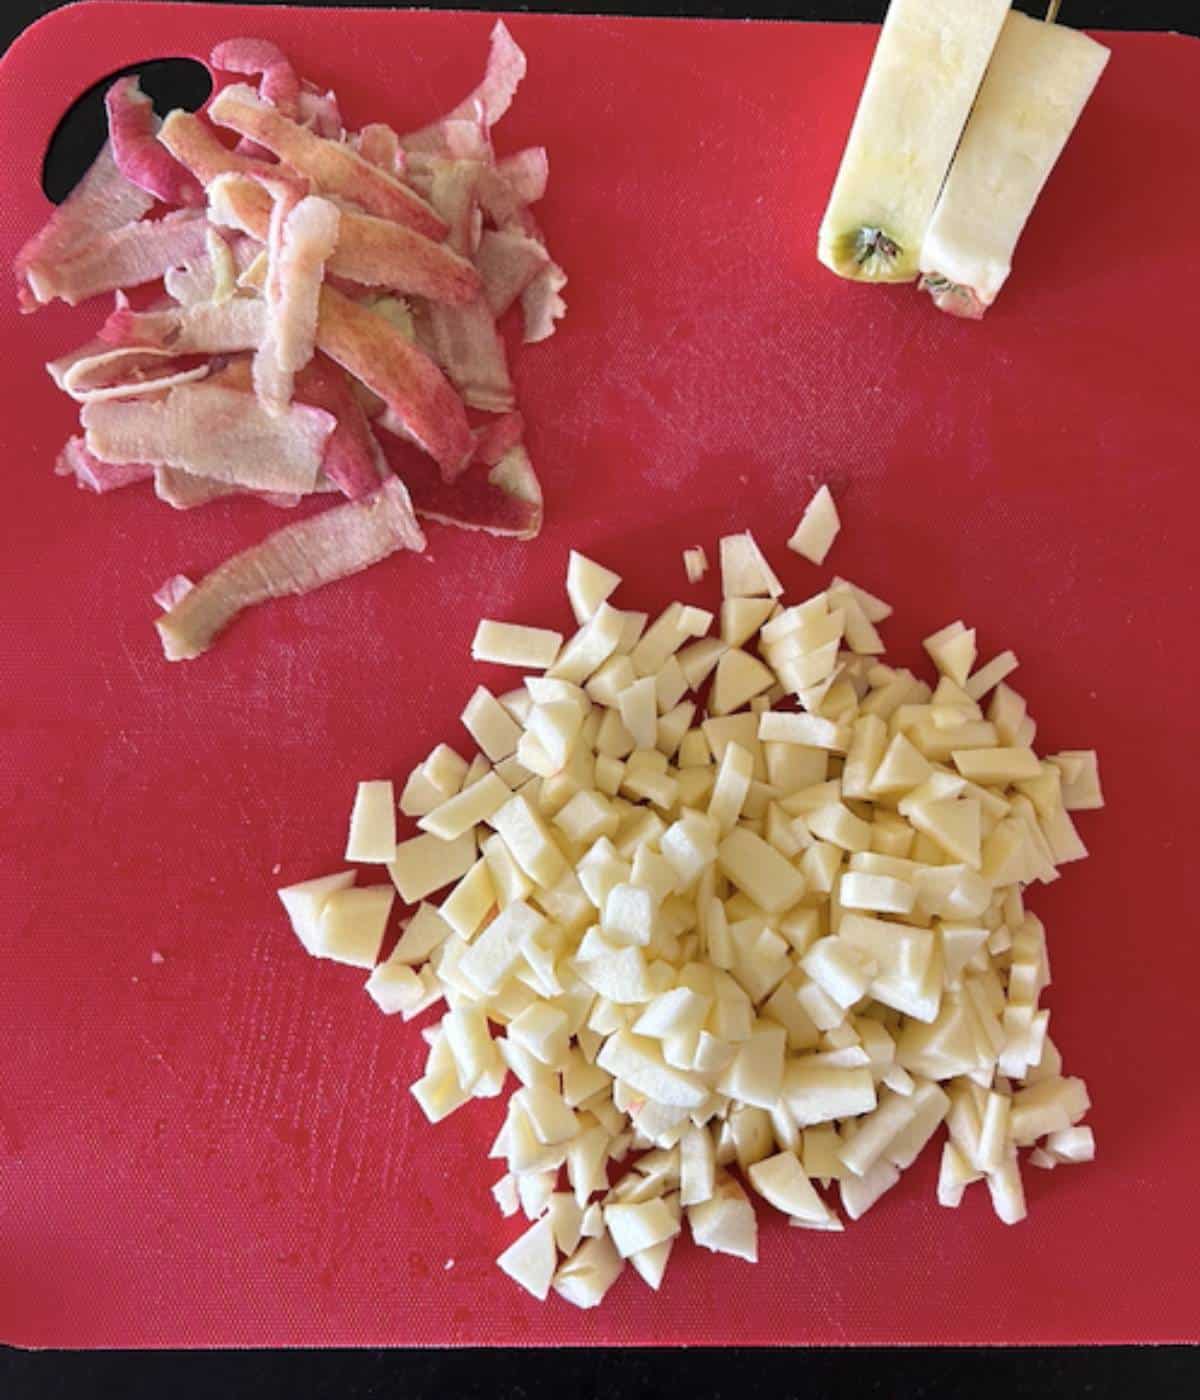 Apples peeled and diced on cutting board.